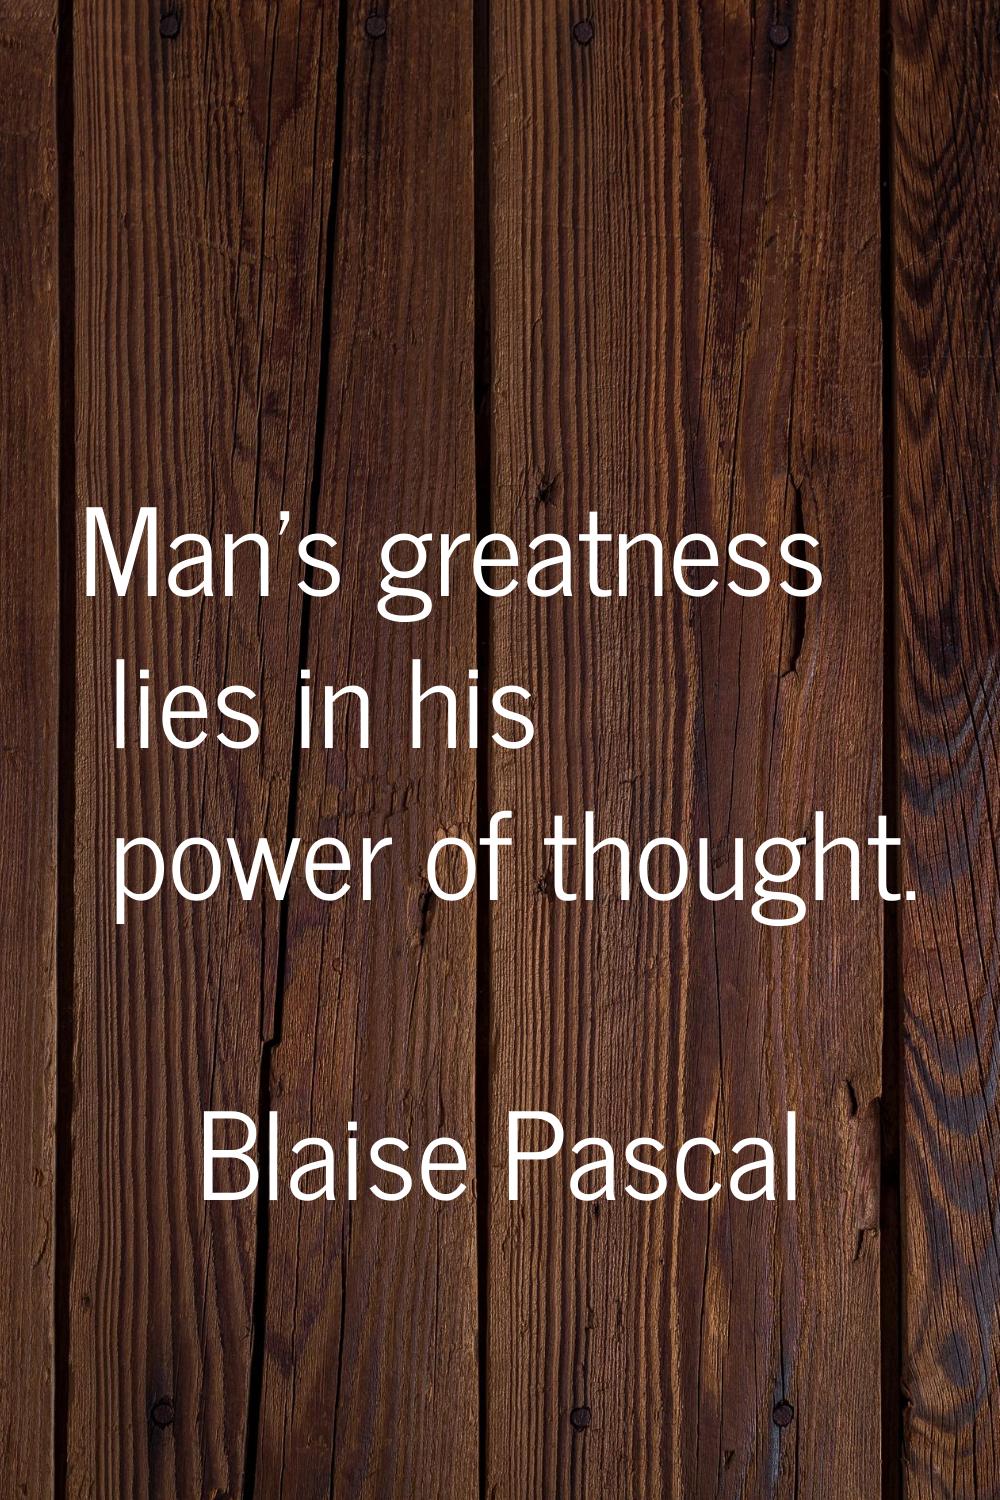 Man's greatness lies in his power of thought.